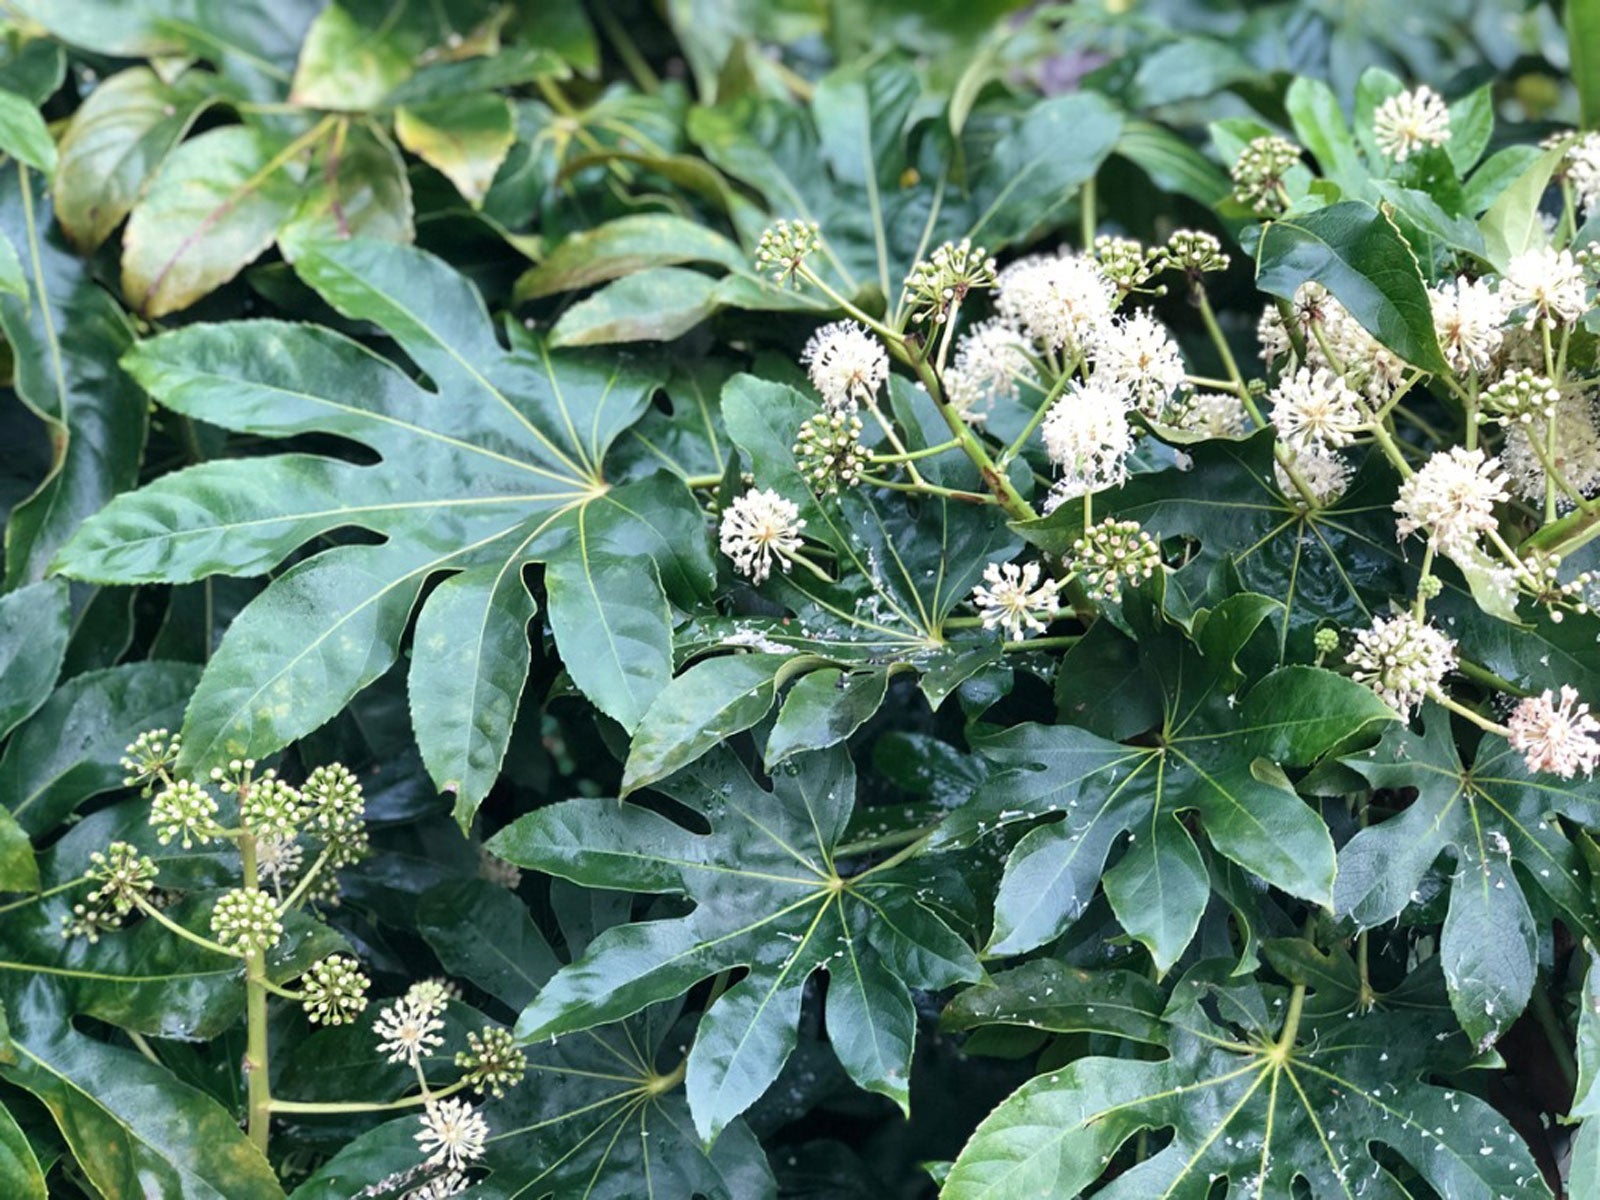 Fatsia Plant Info - How To Grow And Care For Japanese Aralia Plant